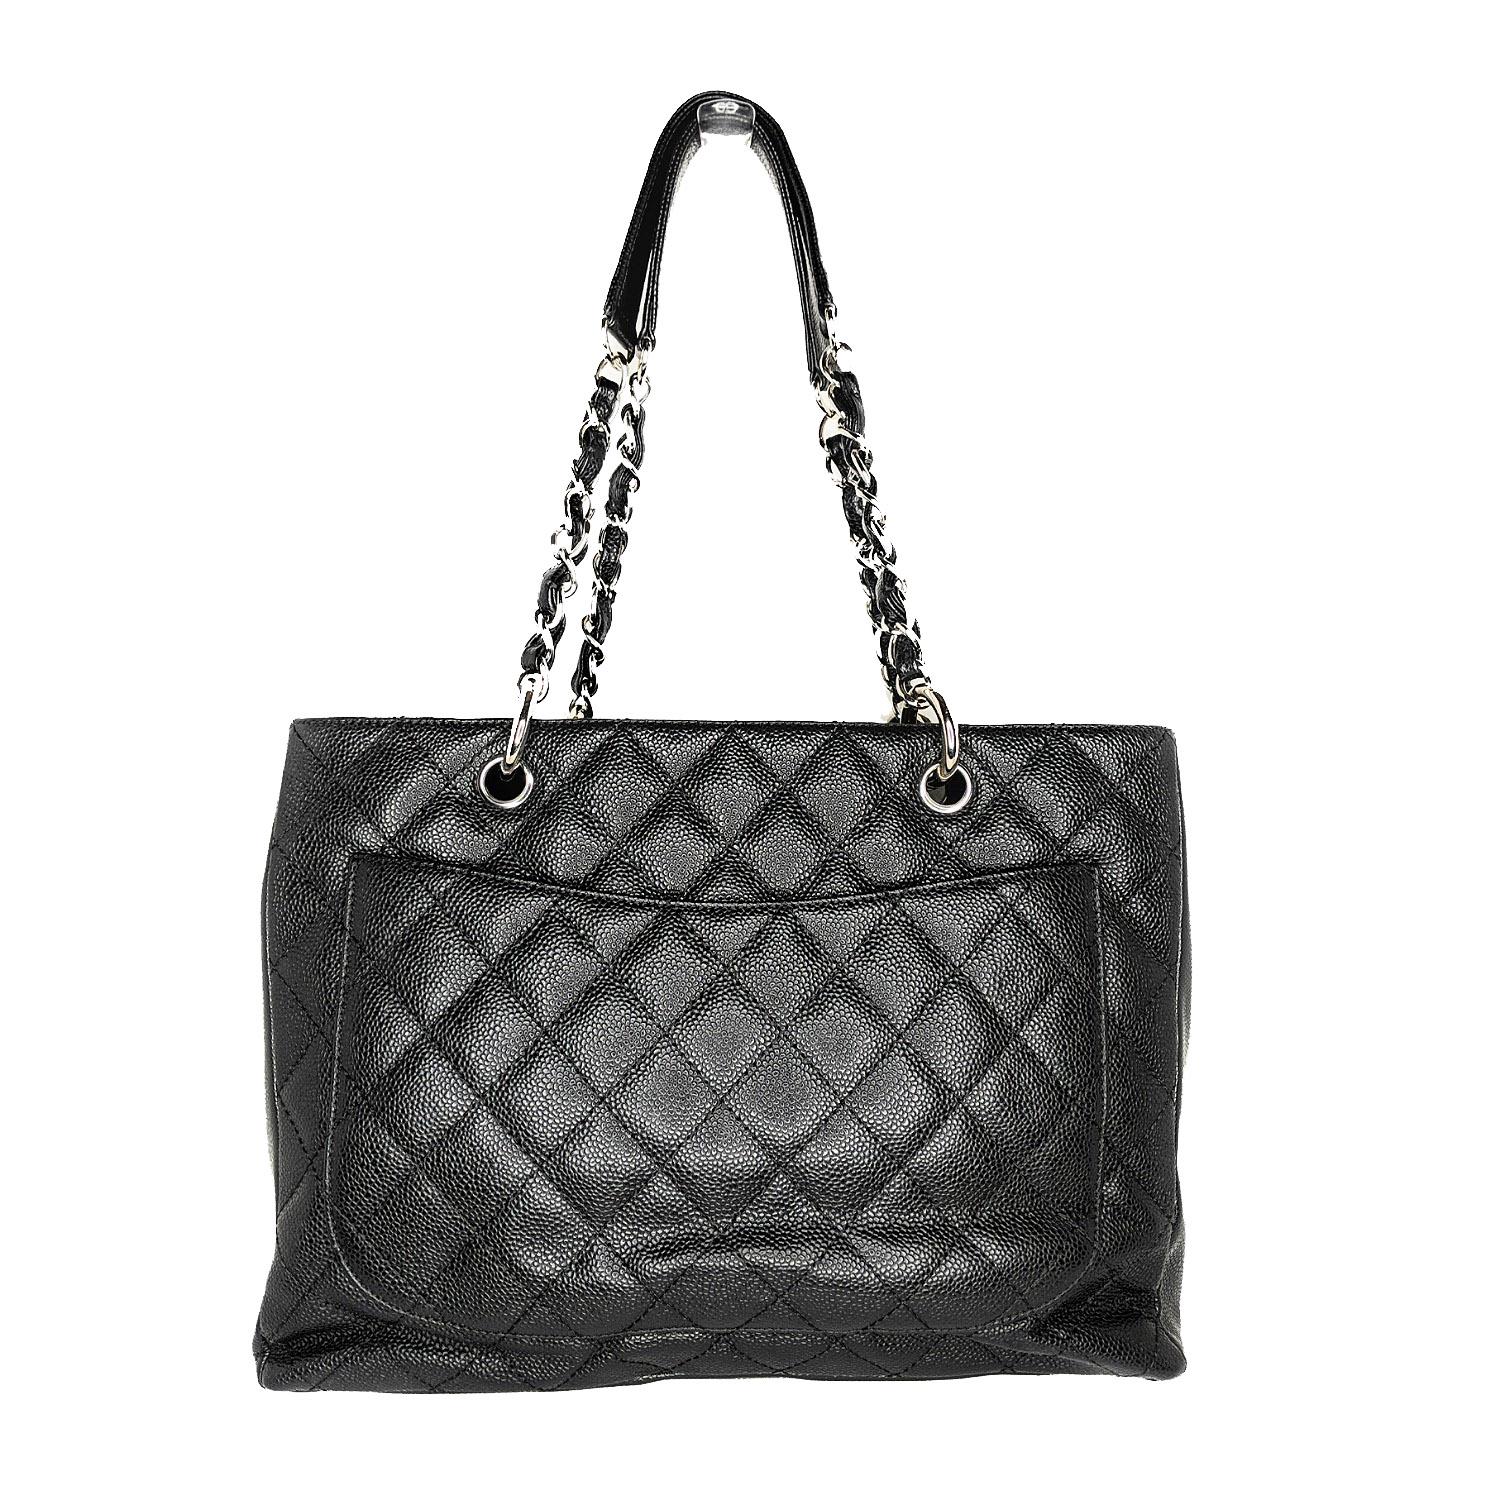 This stylish tote is crafted of diamond-quilted caviar leather in black. This shoulder bag features leather-threaded polished silver chain-link shoulder straps with shoulder pads, a quilted Chanel CC logo on the front, and a flat pocket on the rear.